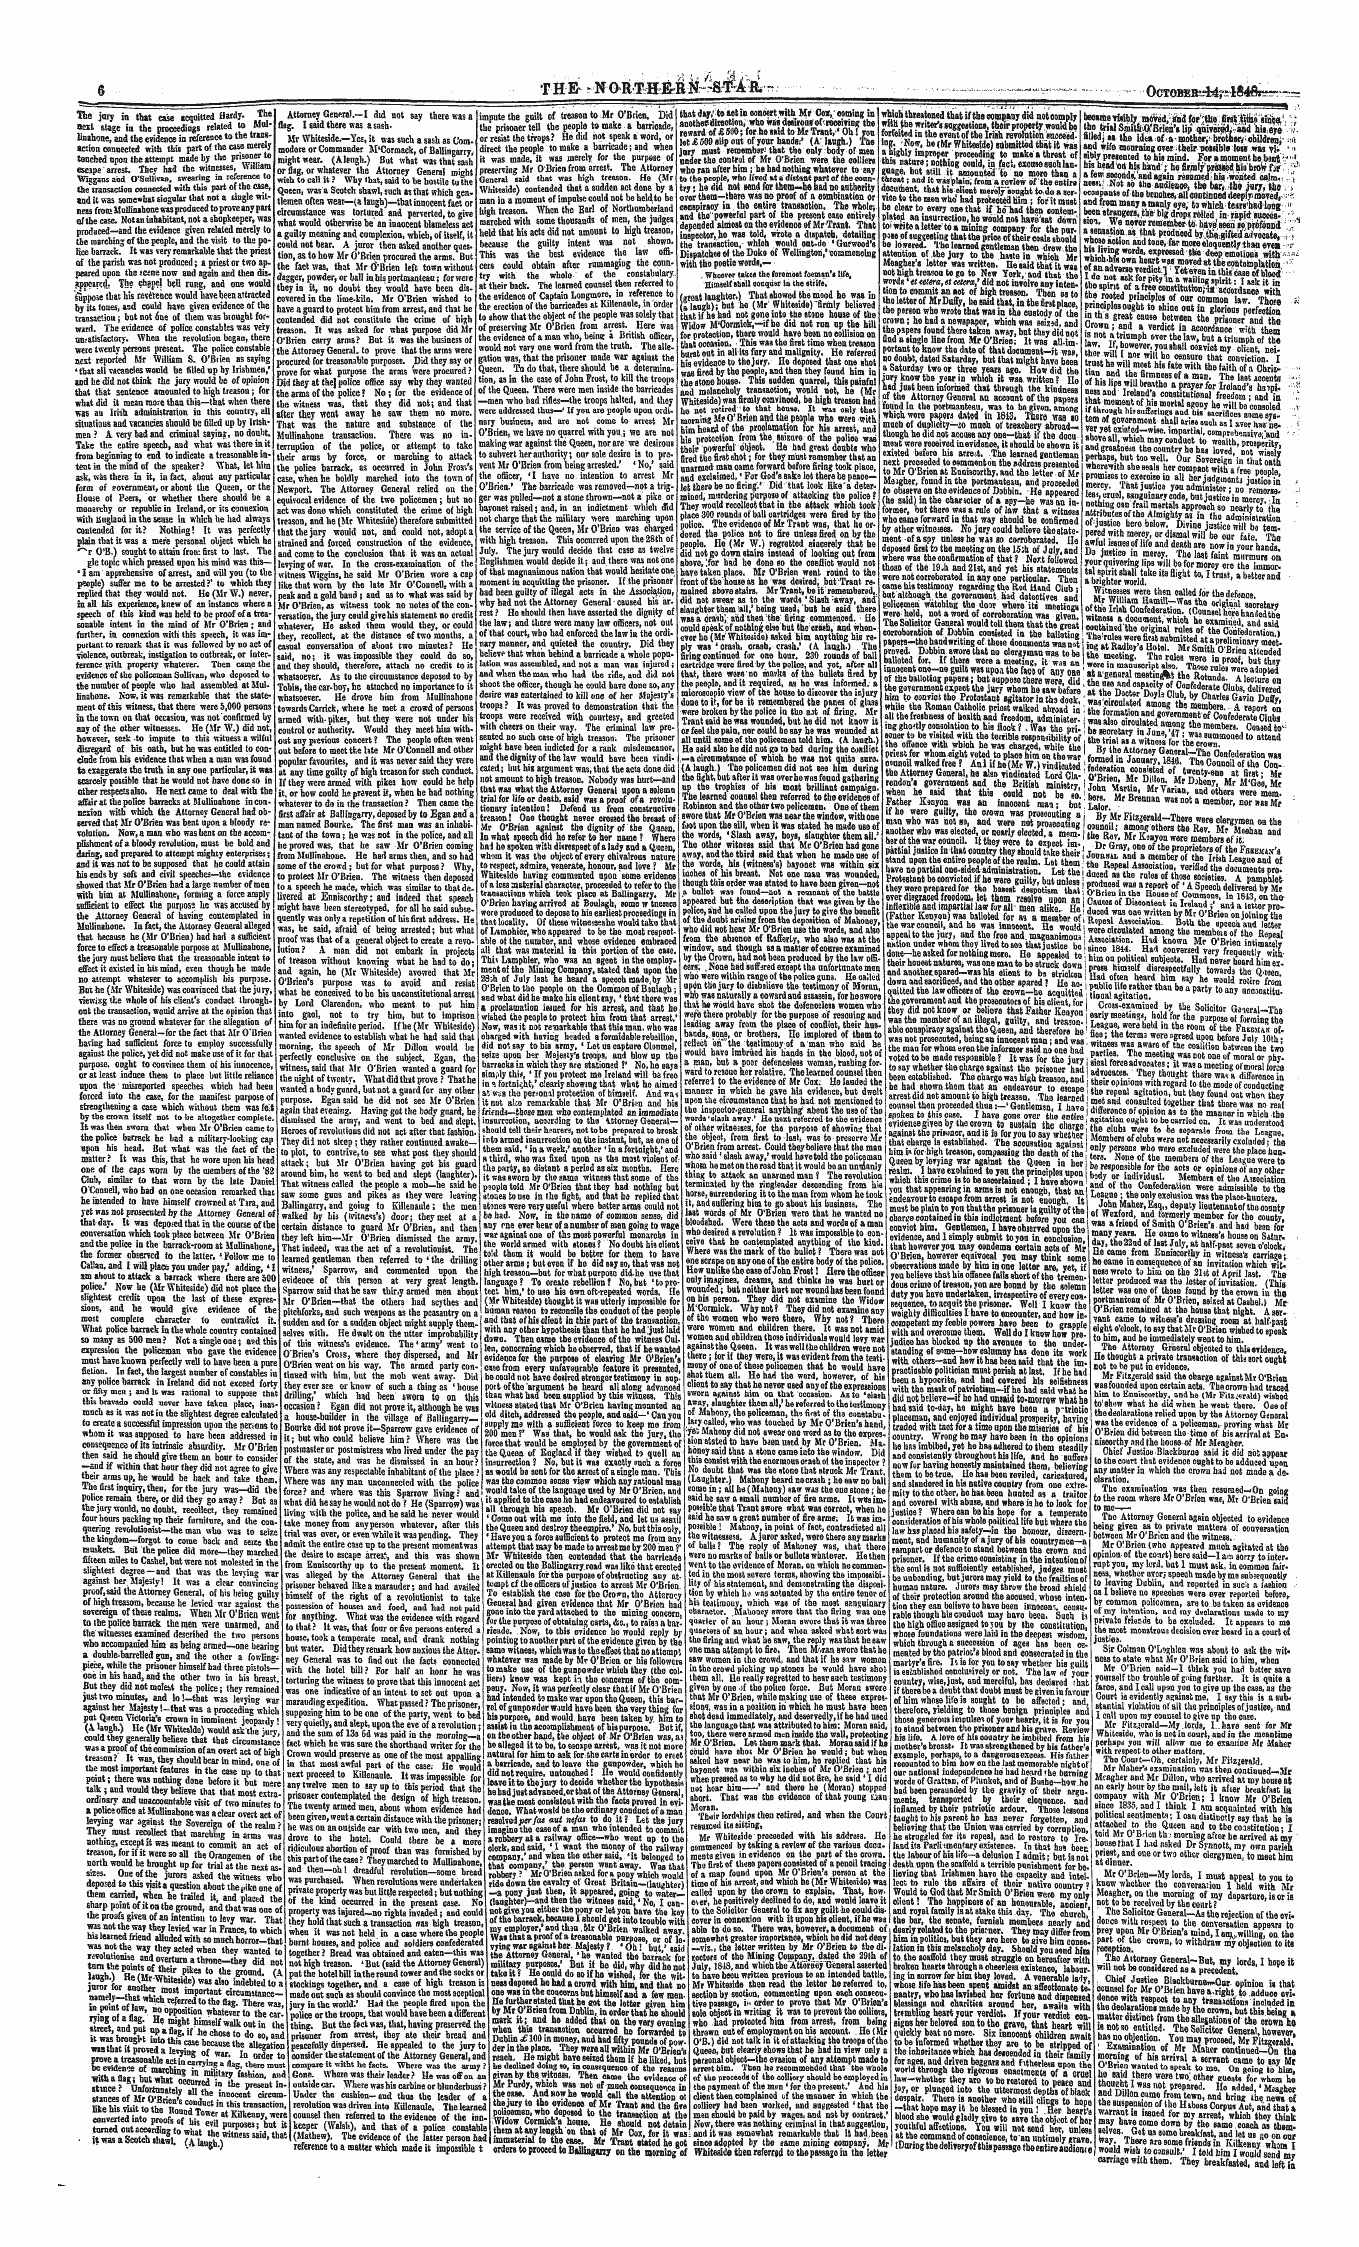 Northern Star (1837-1852): jS F Y, 1st edition - Untitled Article